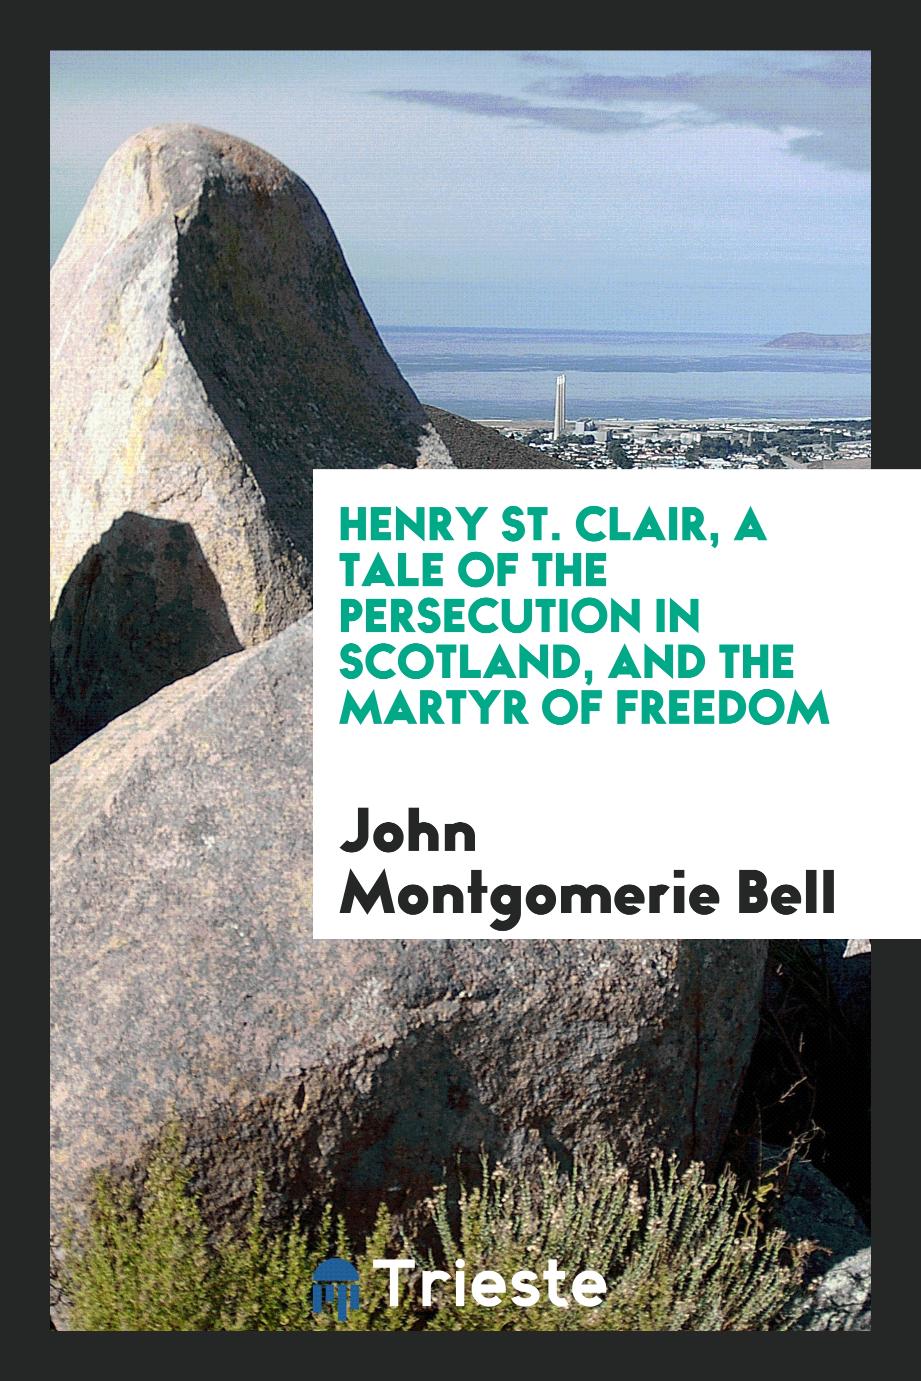 Henry St. Clair, a Tale of the Persecution in Scotland, and the Martyr of Freedom